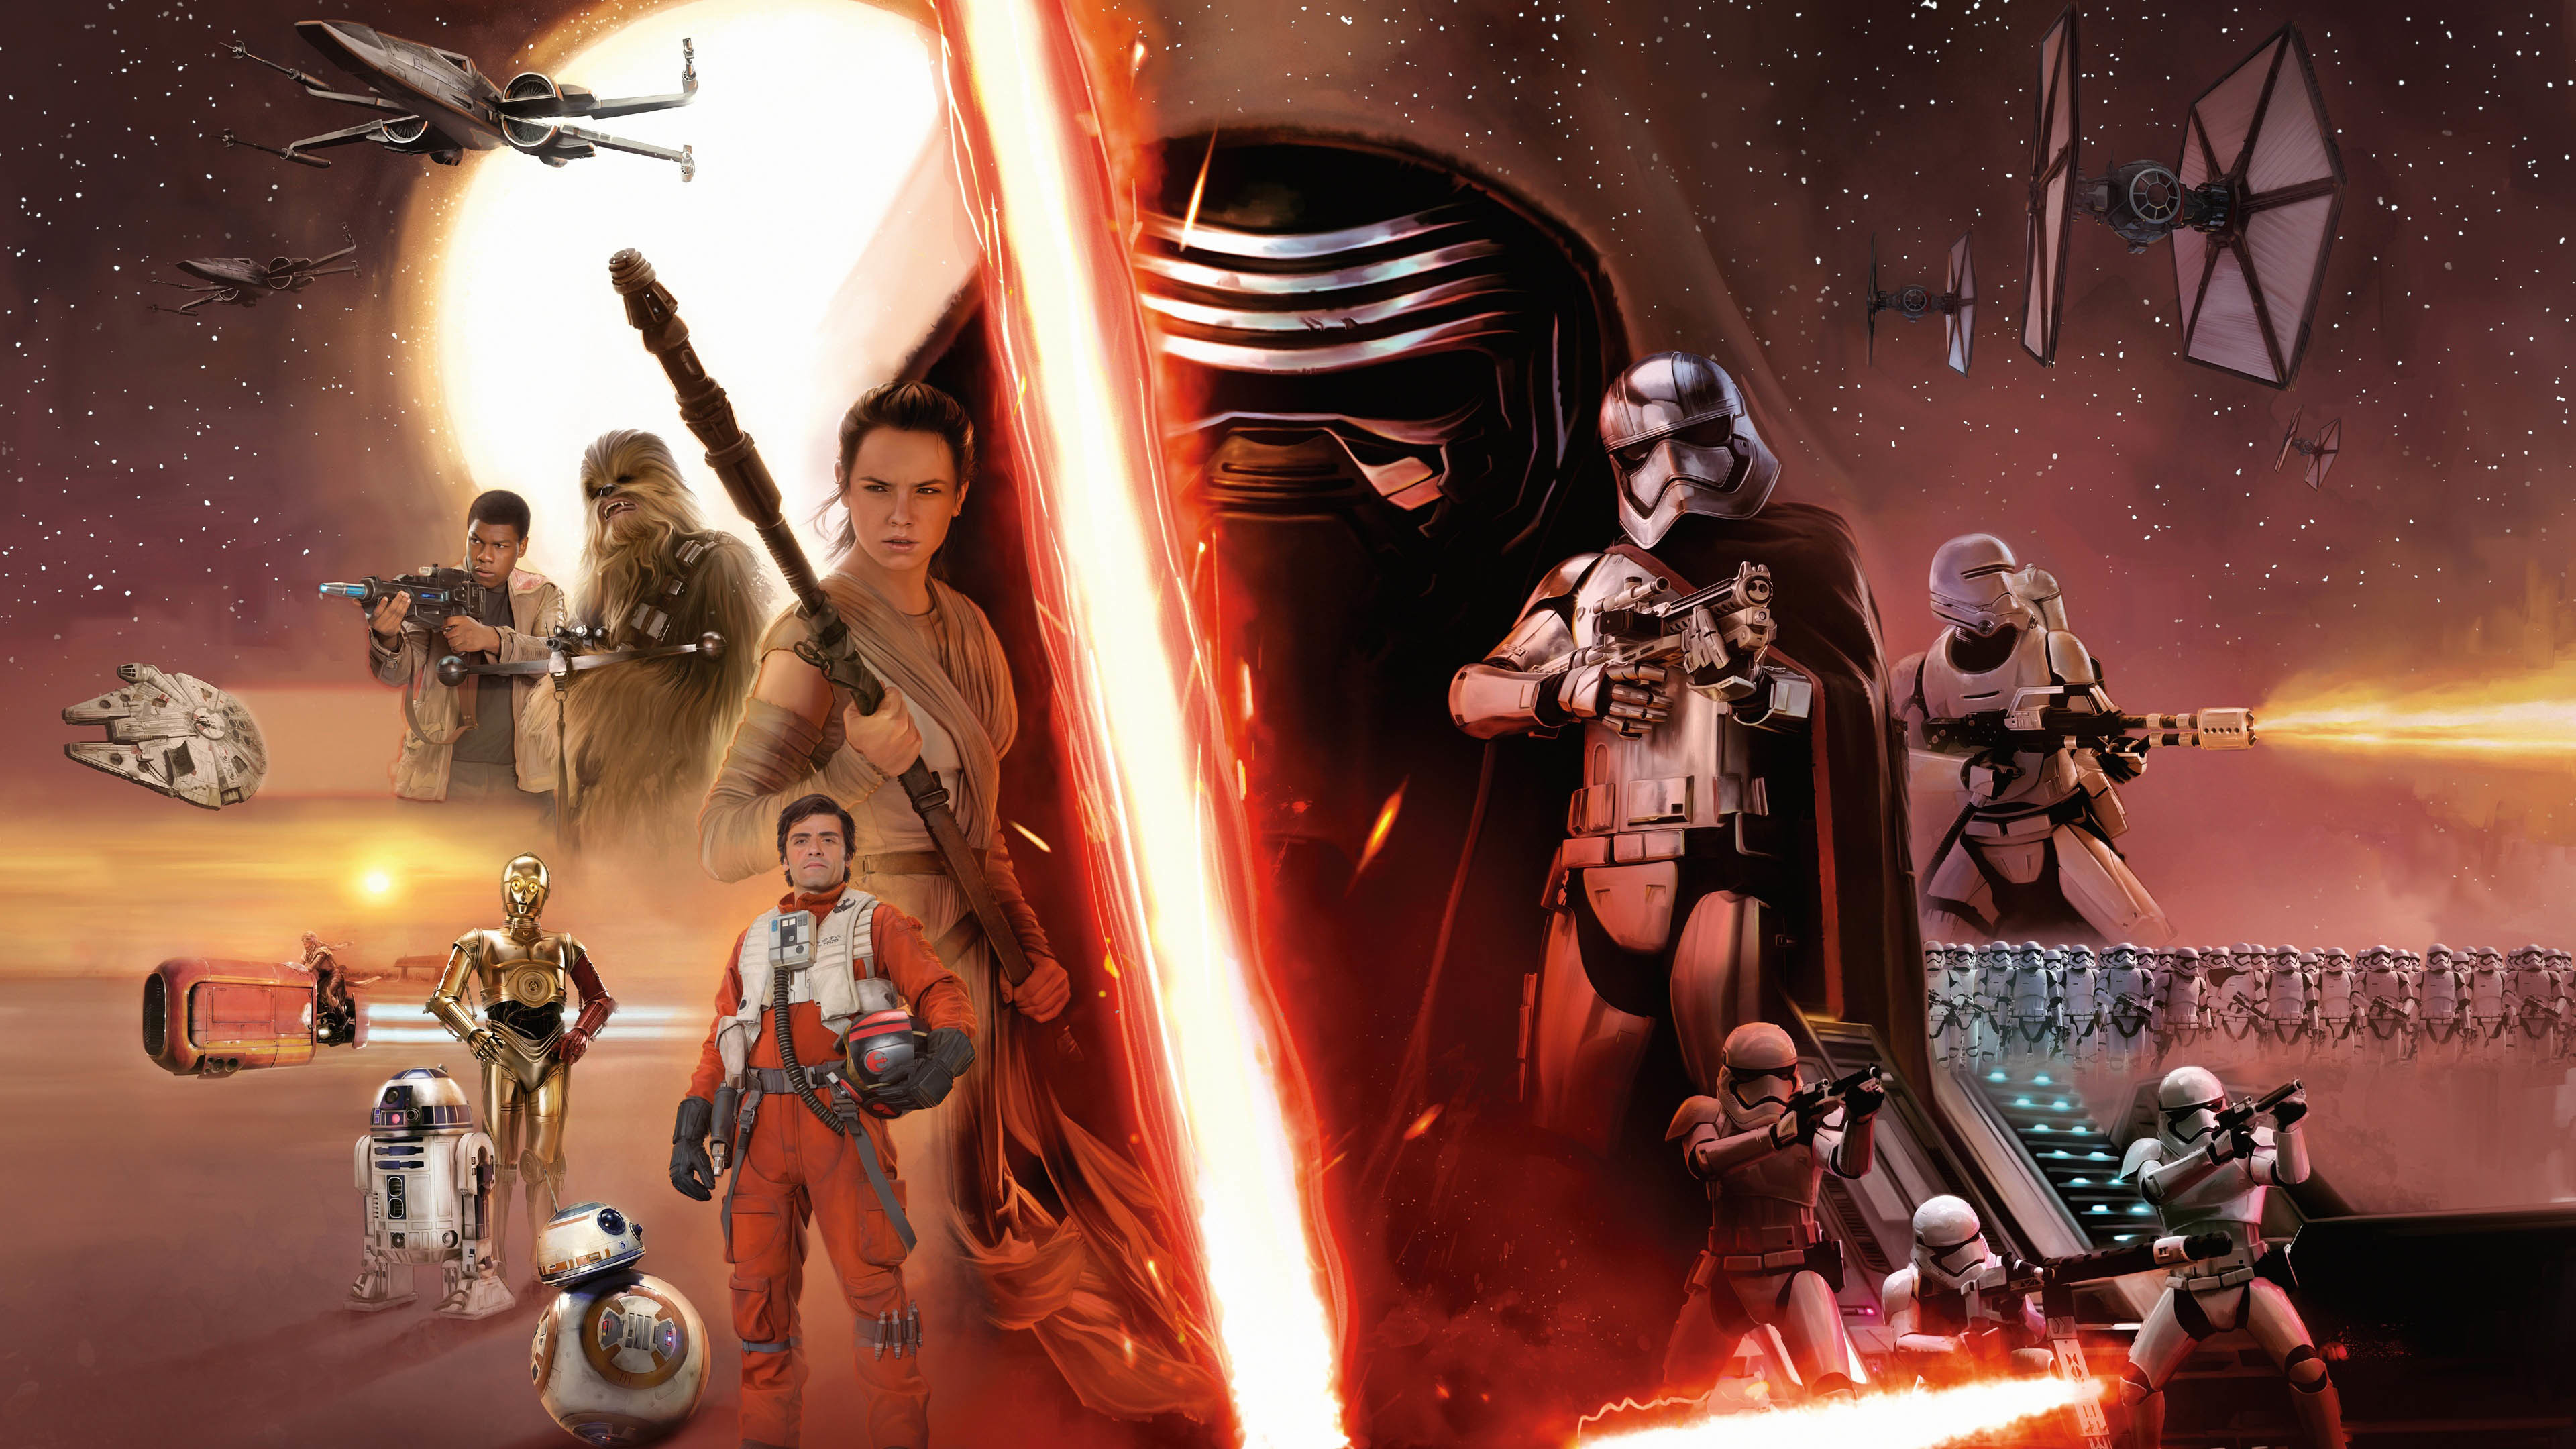 3840x2160 Star Wars, Episode 7: The Force Awakens Characters  wallpaper